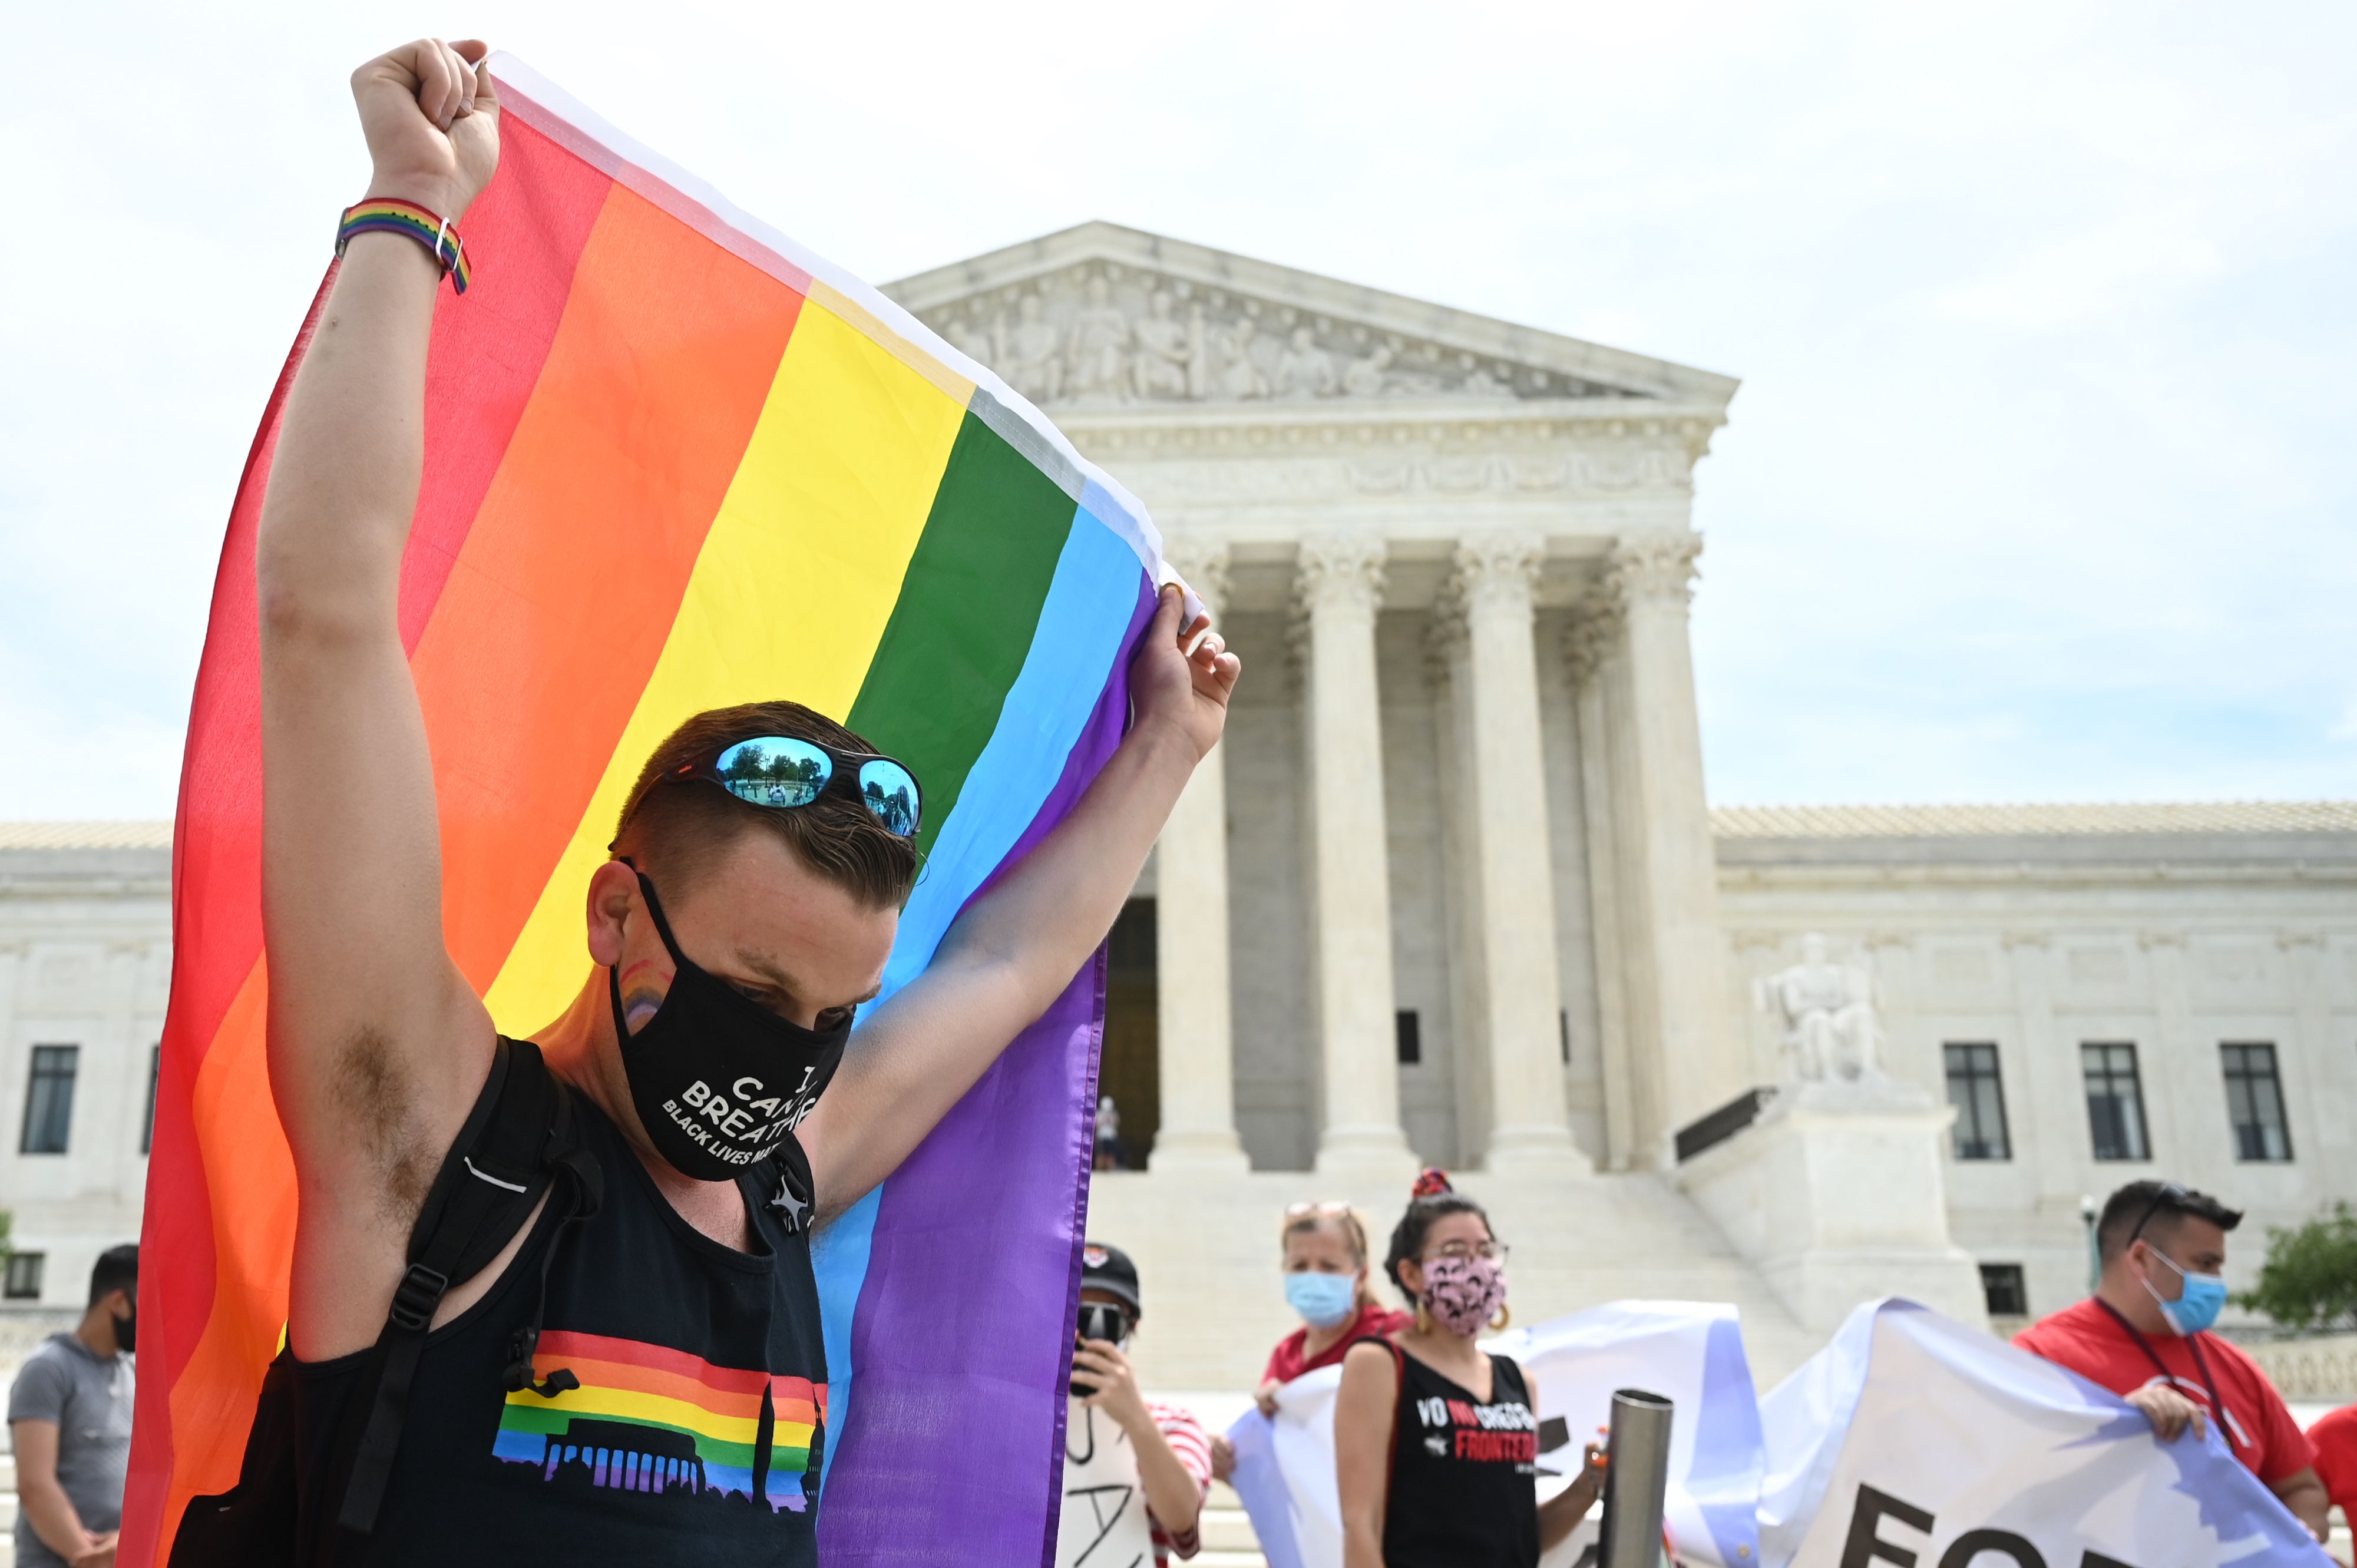 Officials, LGBTQ leaders laud Supreme Court decision, say more work is